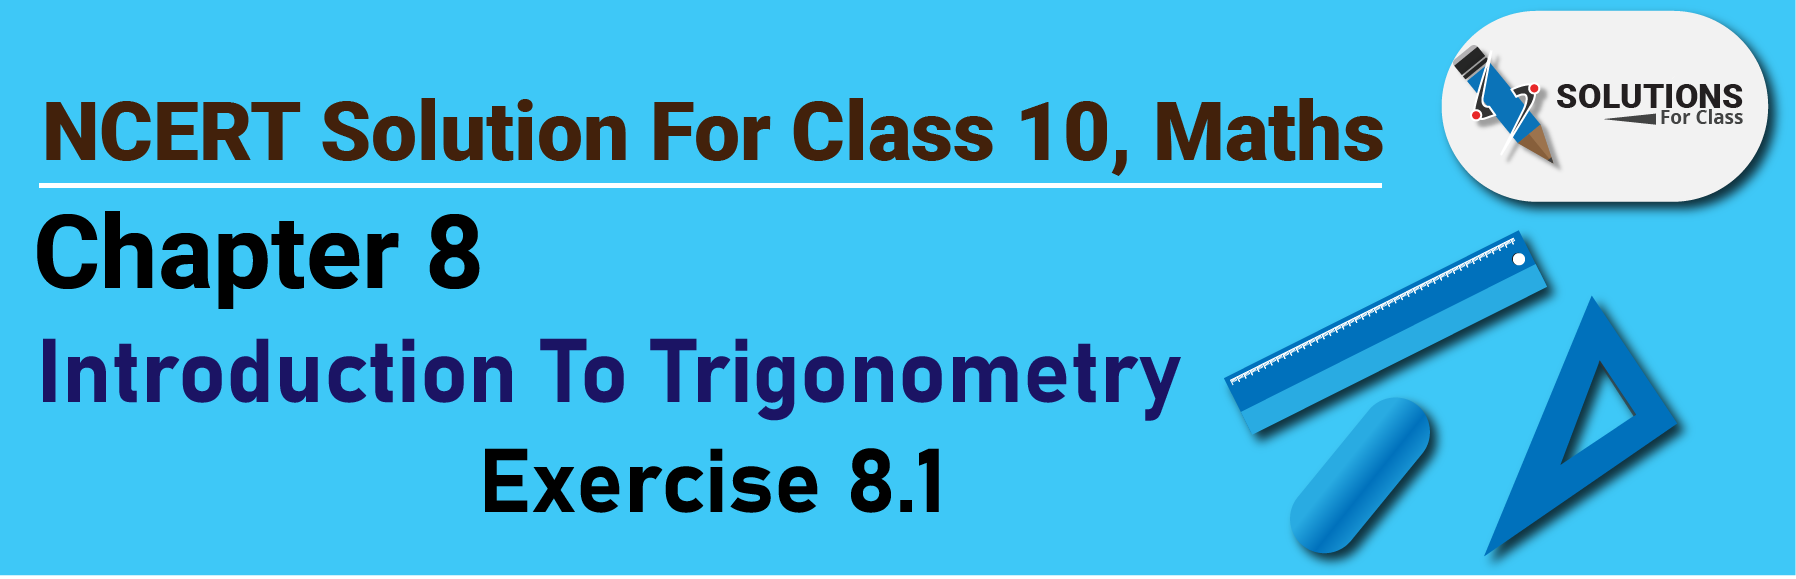 NCERT Solution For Class 10, Maths, Chapter 8, Introduction To Trigonometry, Ex. 8.1